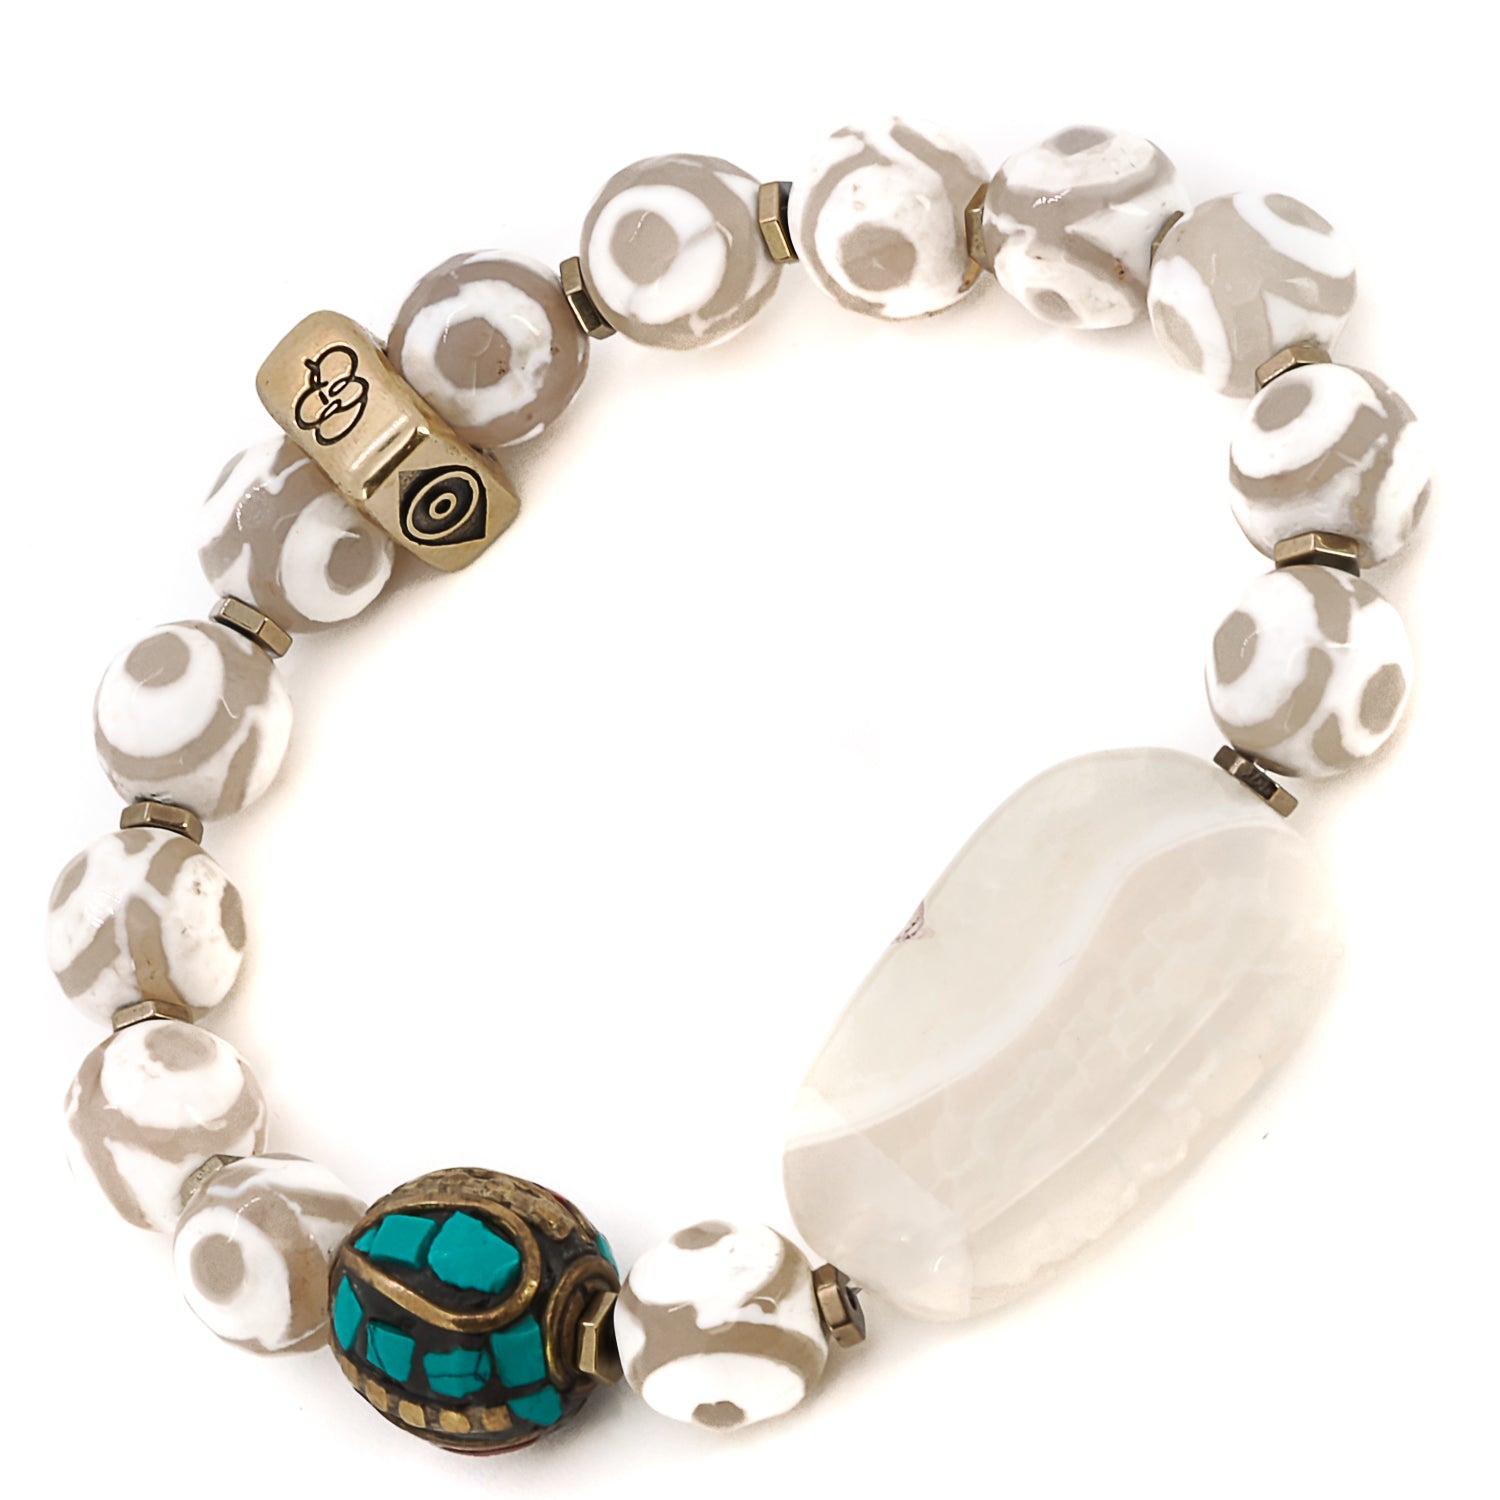 Stunning Eye of Nepal Bracelet - A blend of natural elements and powerful symbols, including white Nepal agate, green agate, and protective bronze symbols.